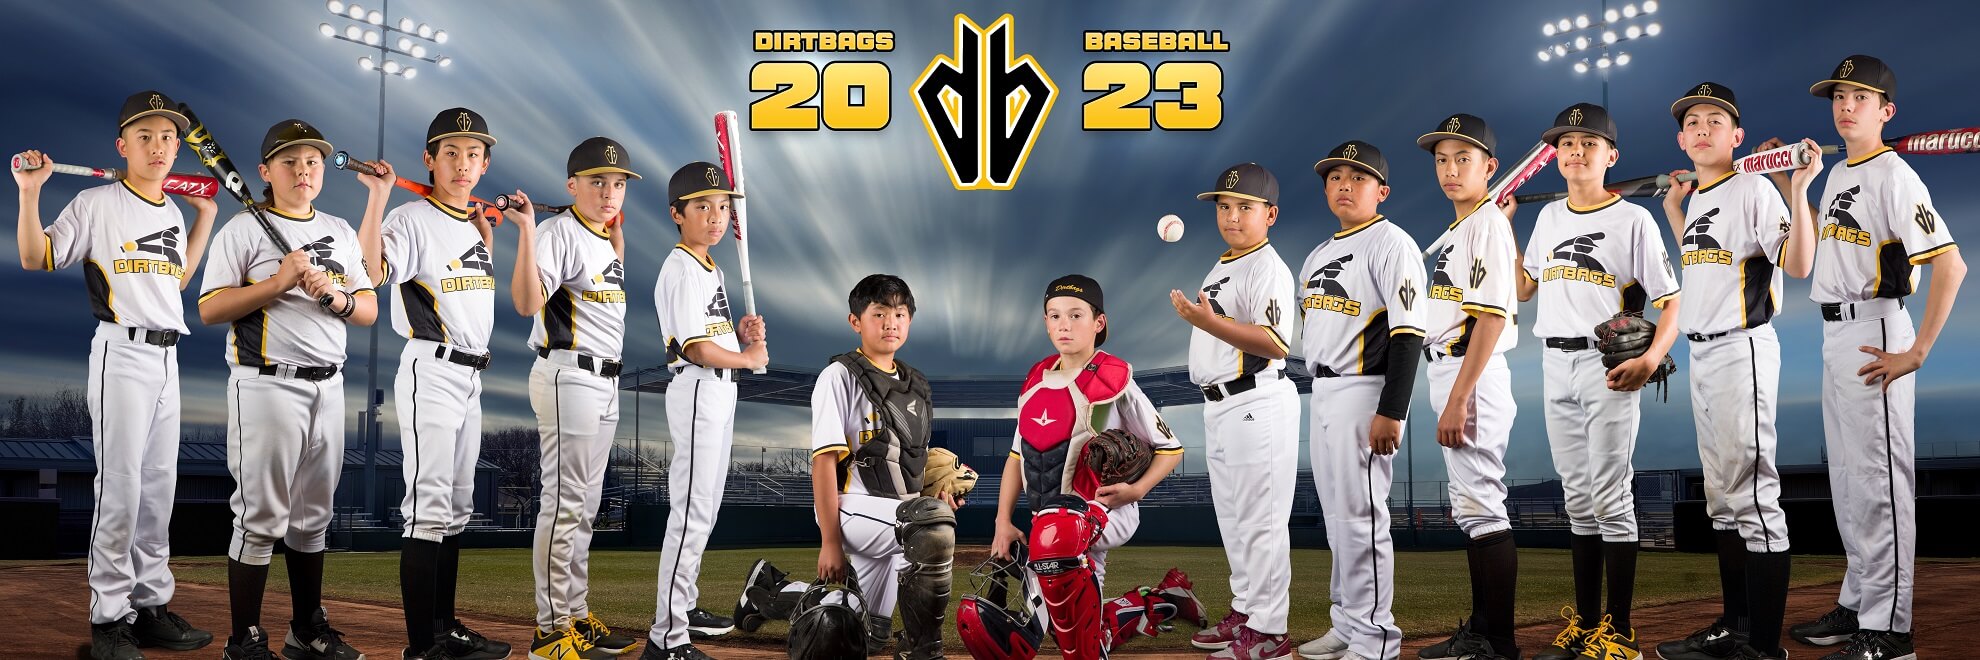 Unique, one-of-a-kind sports photo portraits and composites. Baseball season photos, photographs, baseball, softball, baseball team photos, baseball individual photos, baseball catcher pictures, game photos. little league, Pop Warner, Cooperstown baseball pictures, baseball league and base ball school team photos.